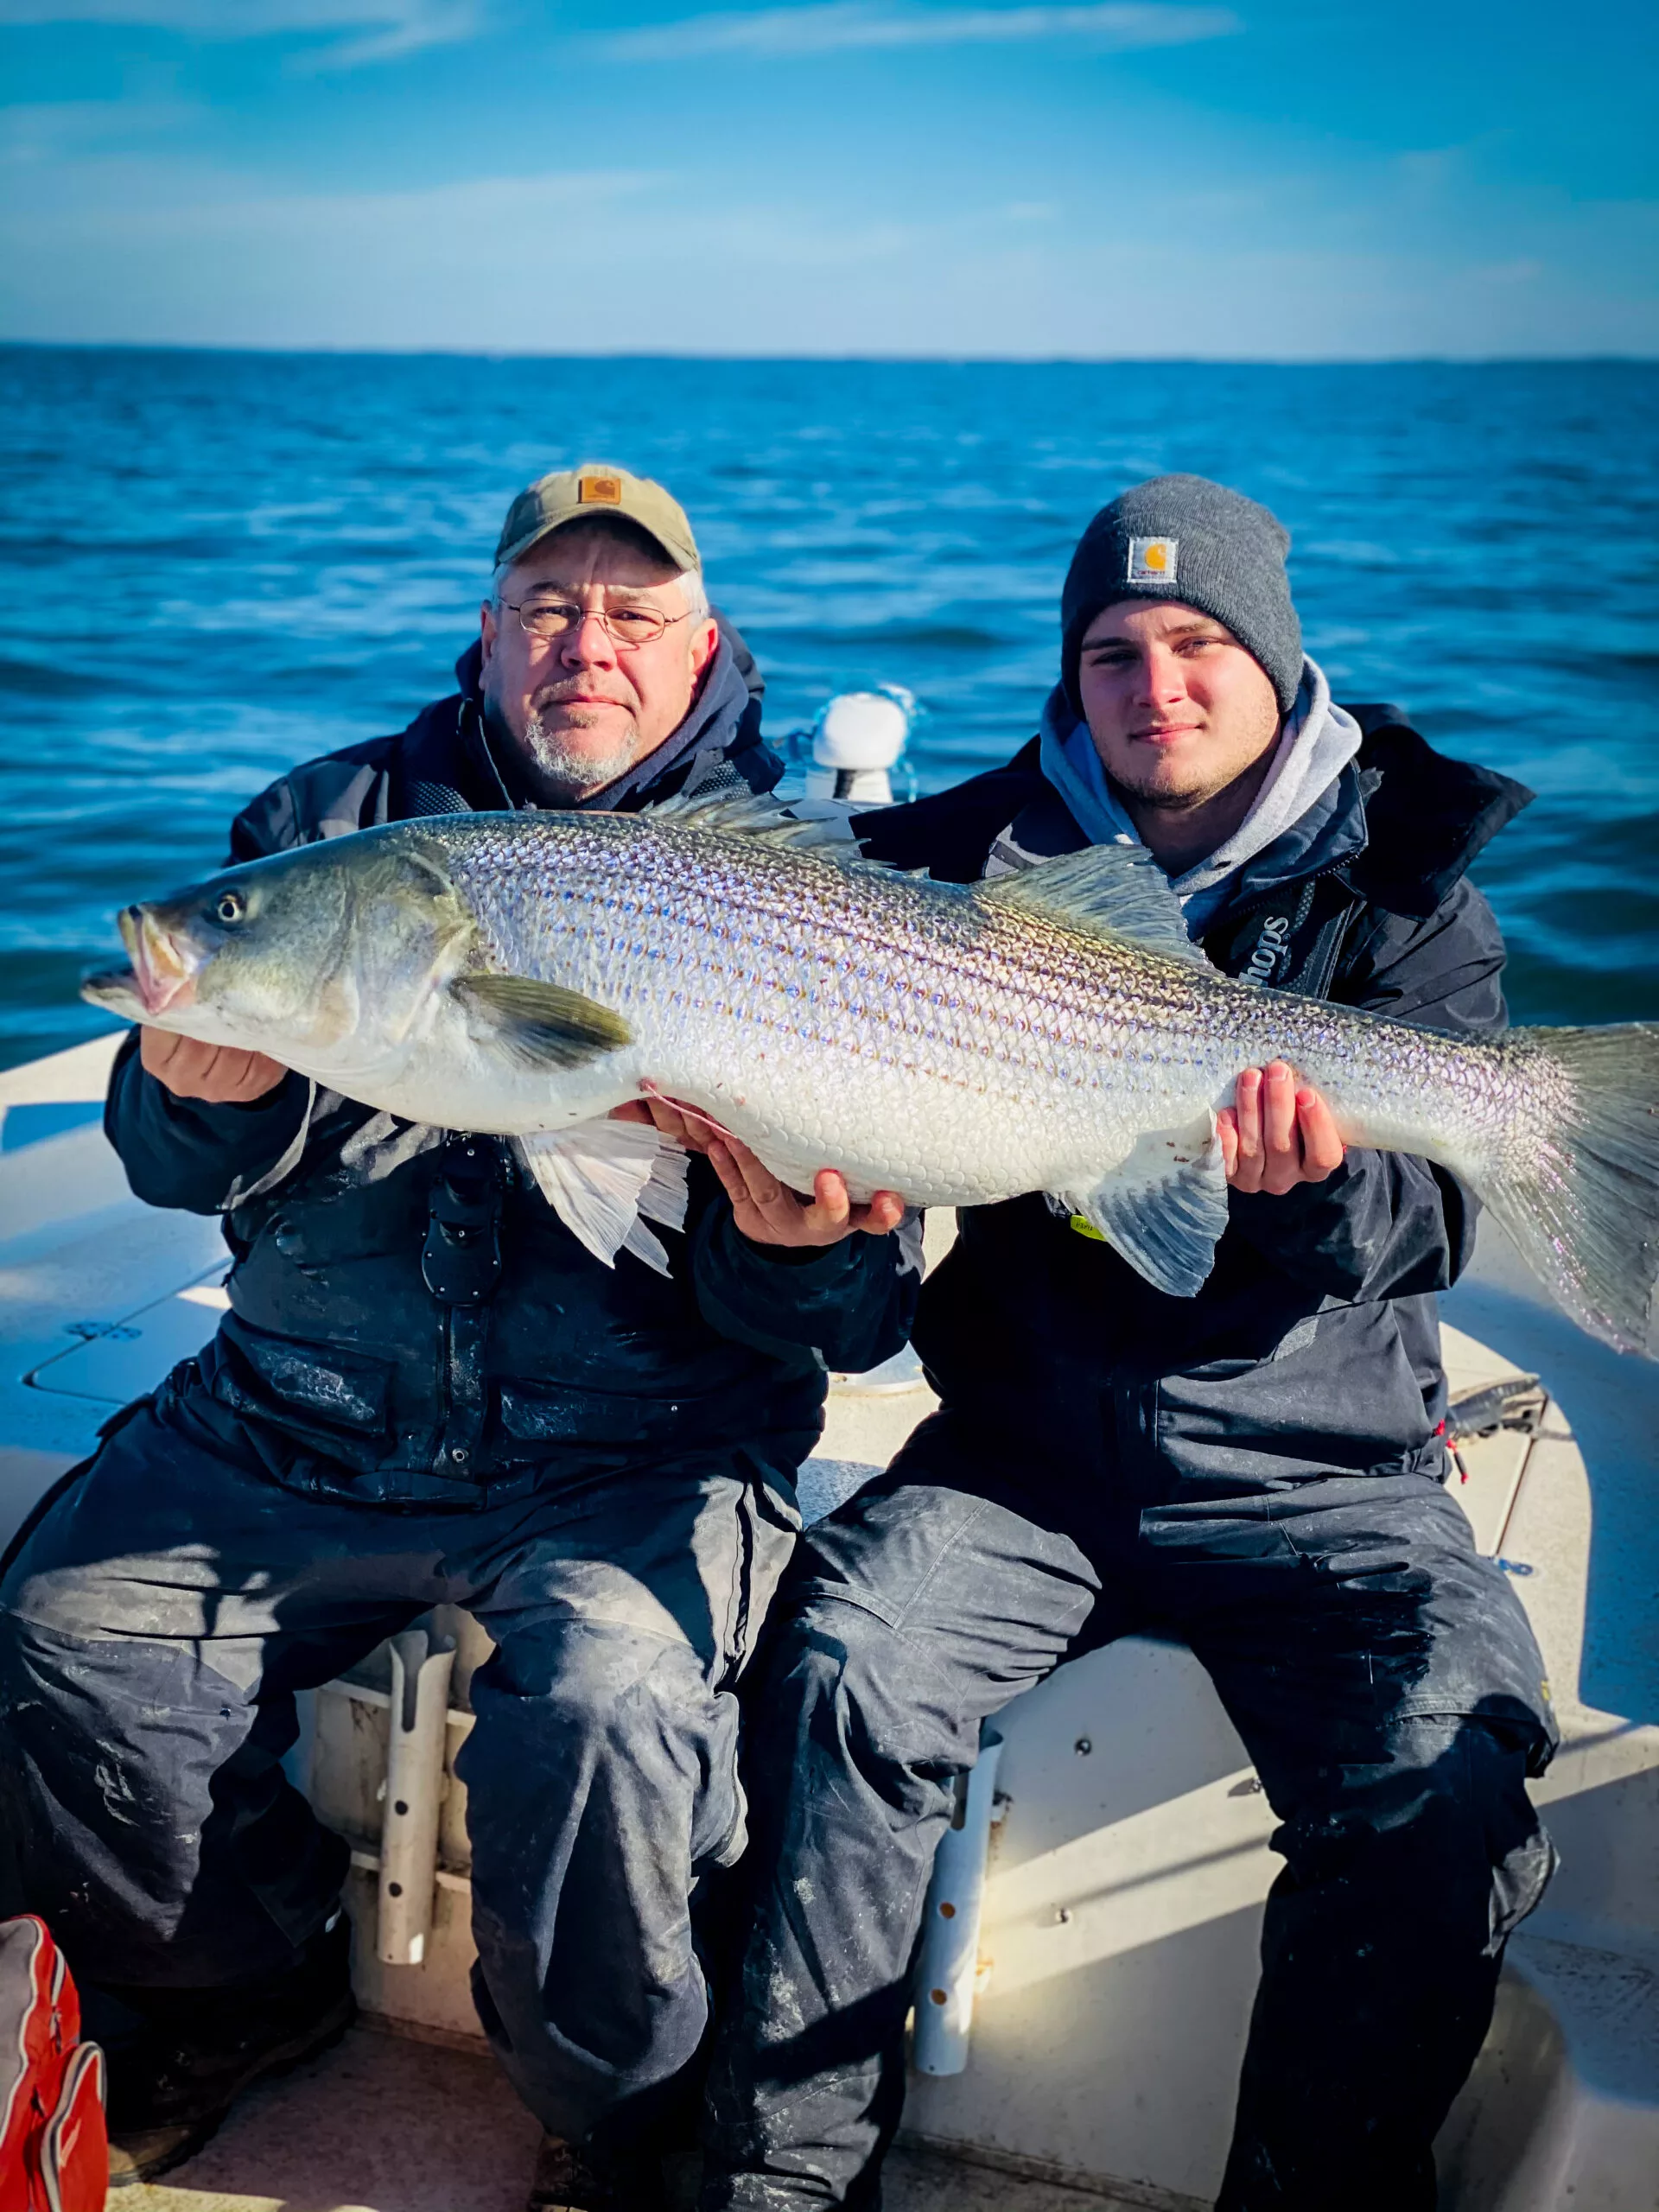 A large Striper Bass fish being held up by Captain Tommy and crew.